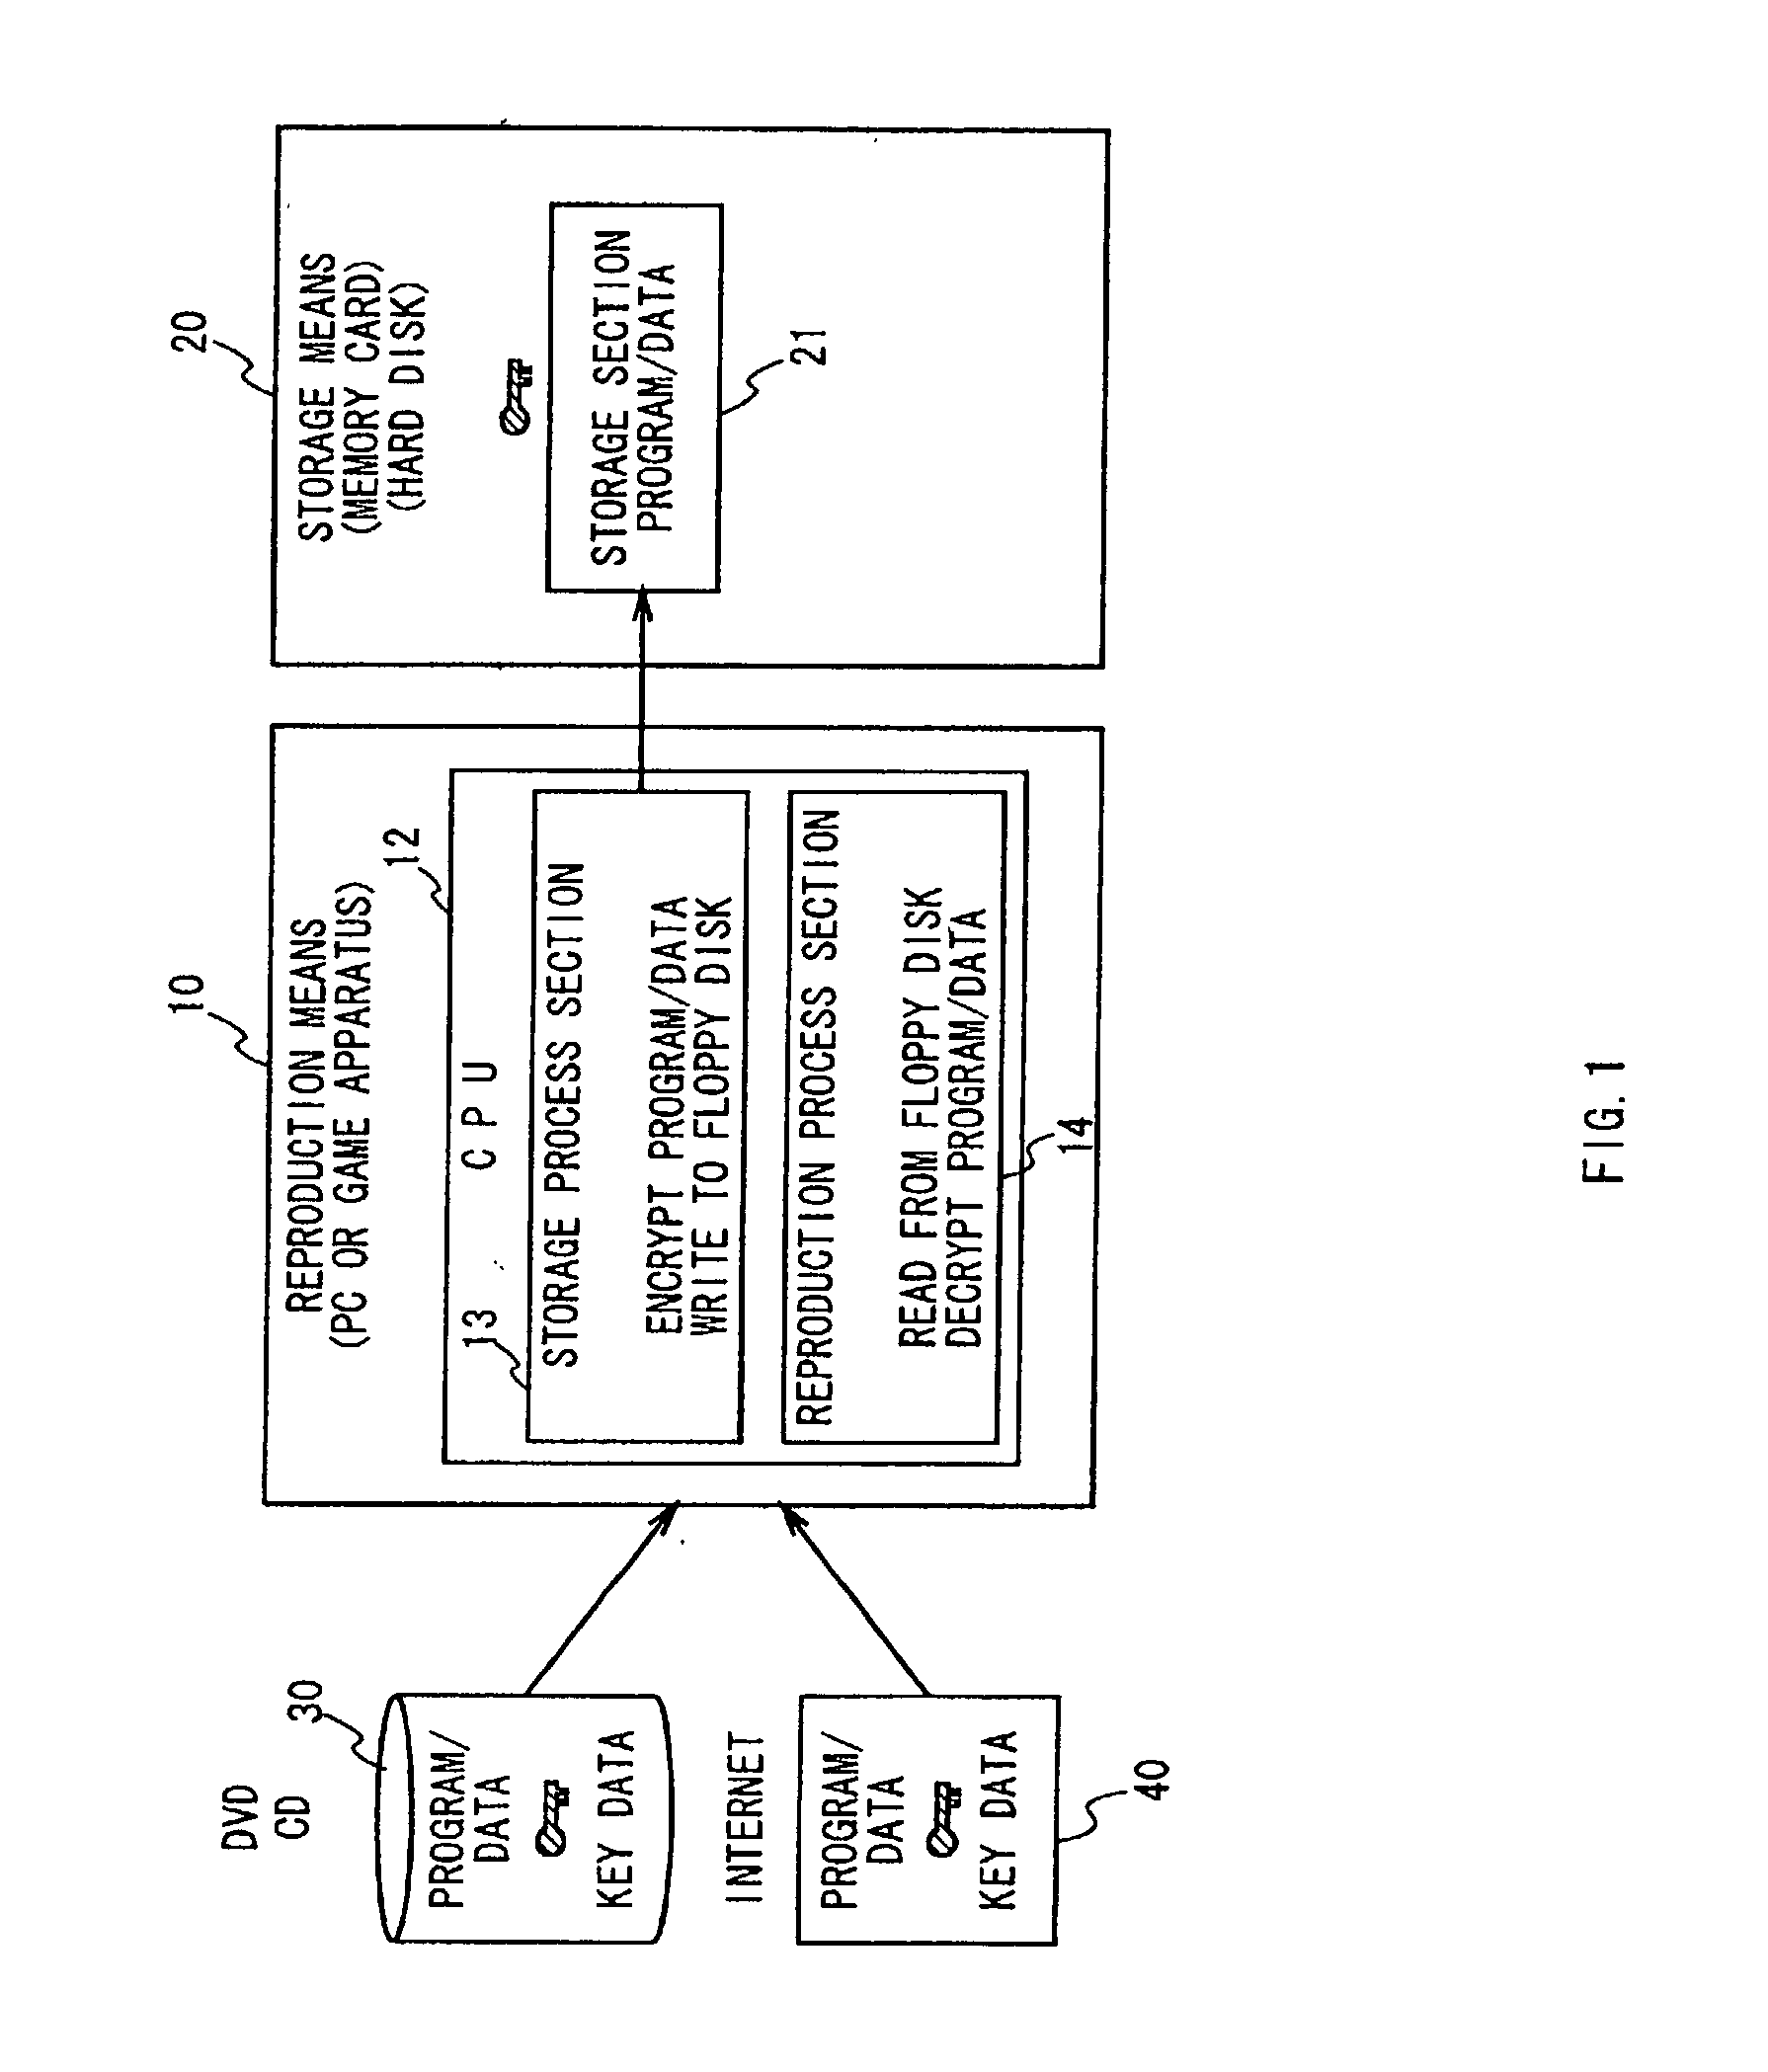 Data authentication system